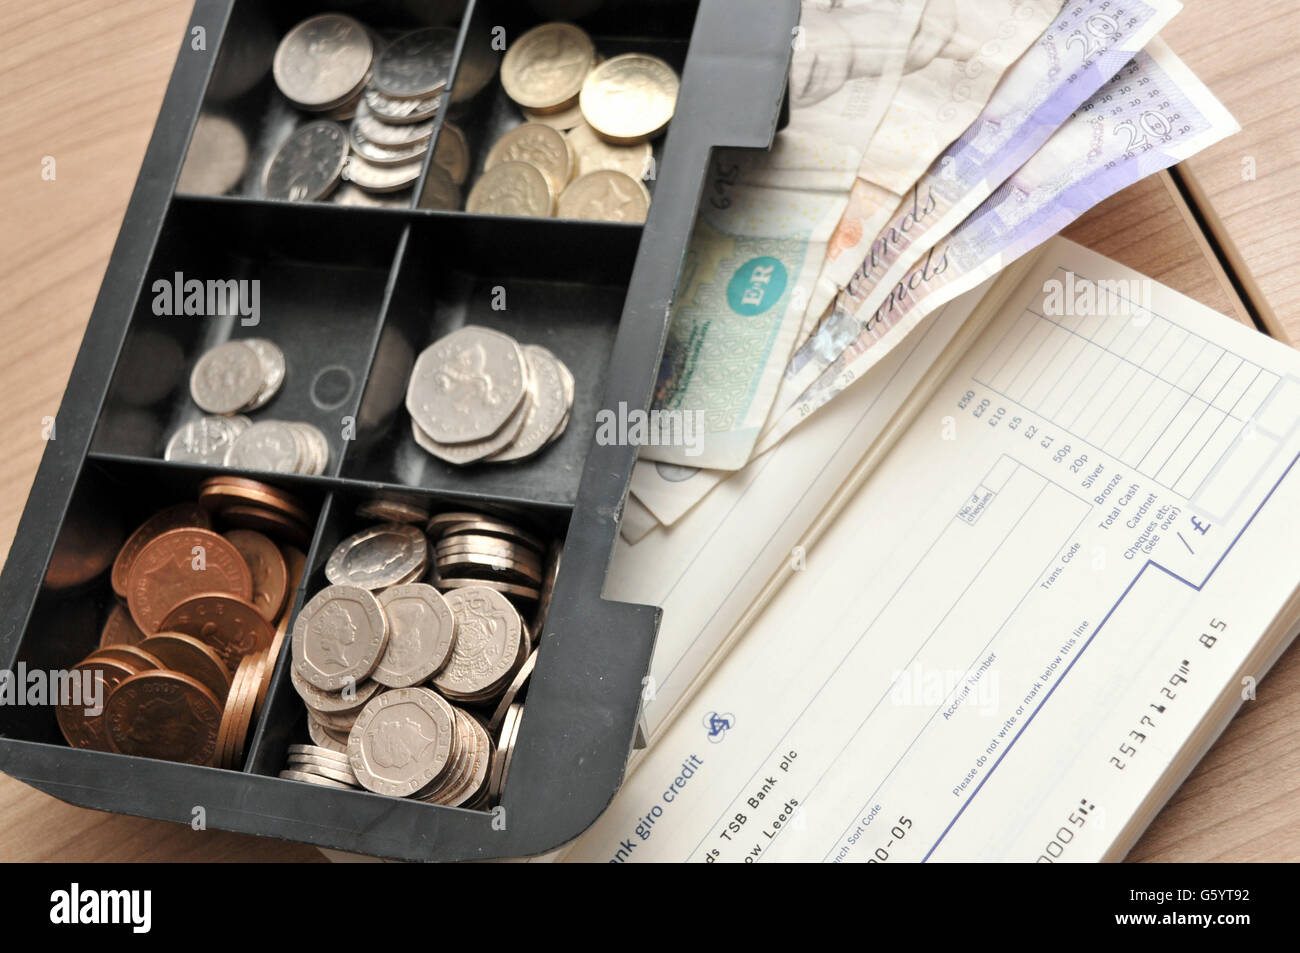 A tray of British coins next to bank notes and a paying in book sat on a backdrop of a wooden work table Stock Photo